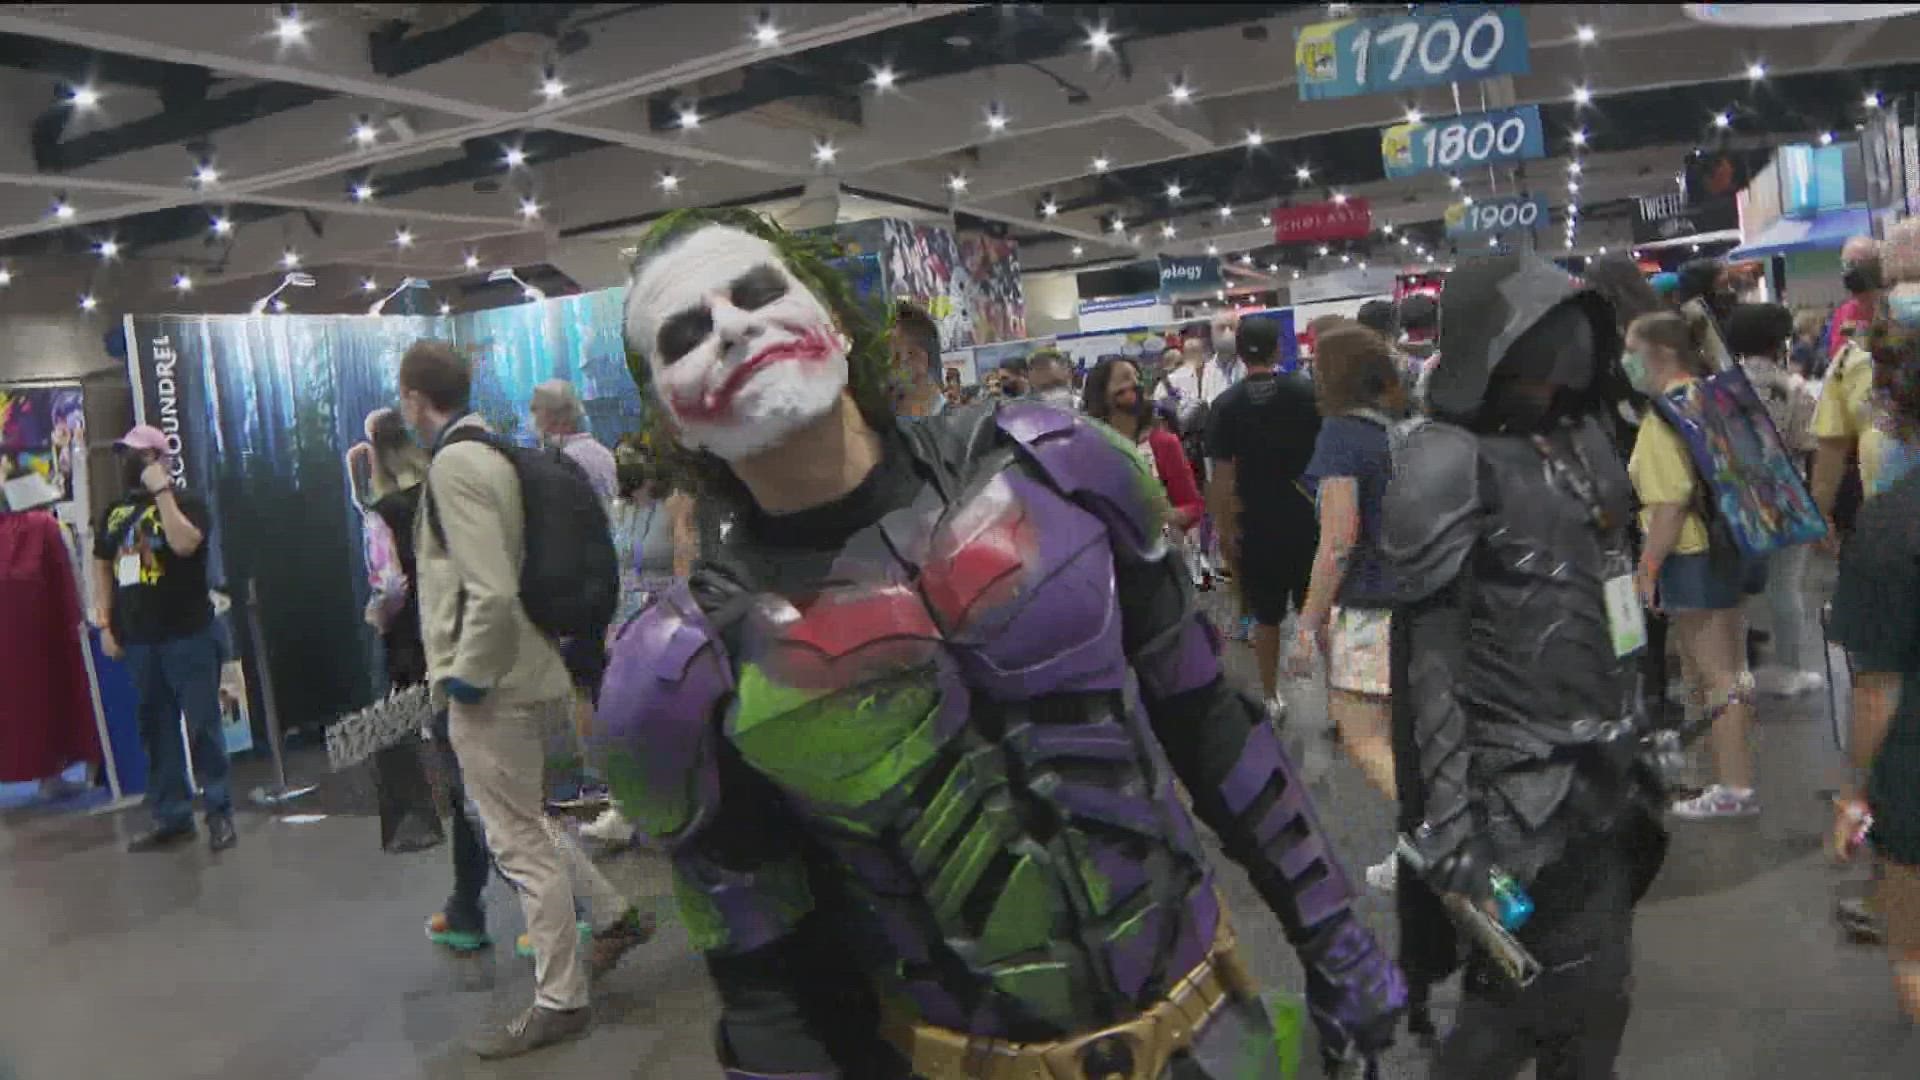 CBS 8 gives a look ahead of the second day of Comic-Con, Friday, July 22.